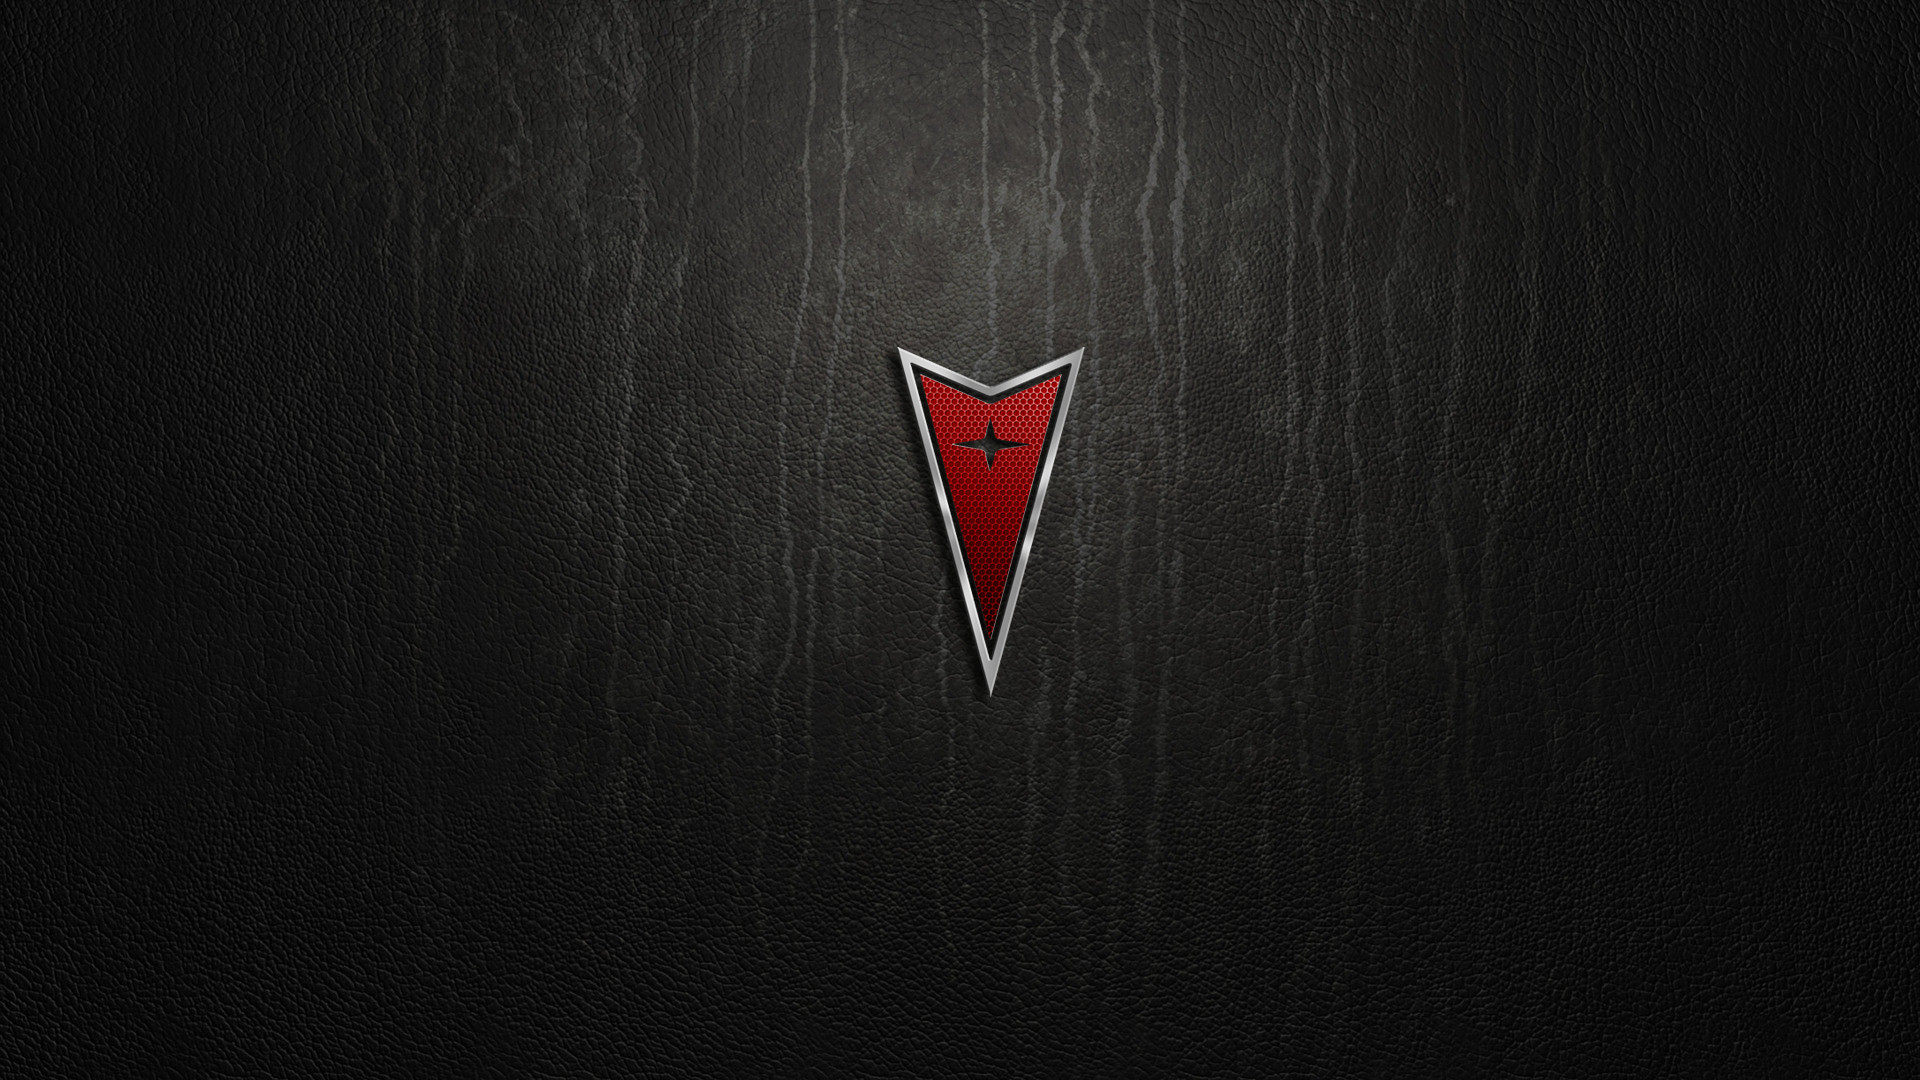 1920x1080 Related Wallpapers from Falcons Wallpaper. Pontiac Logo Wallpaper